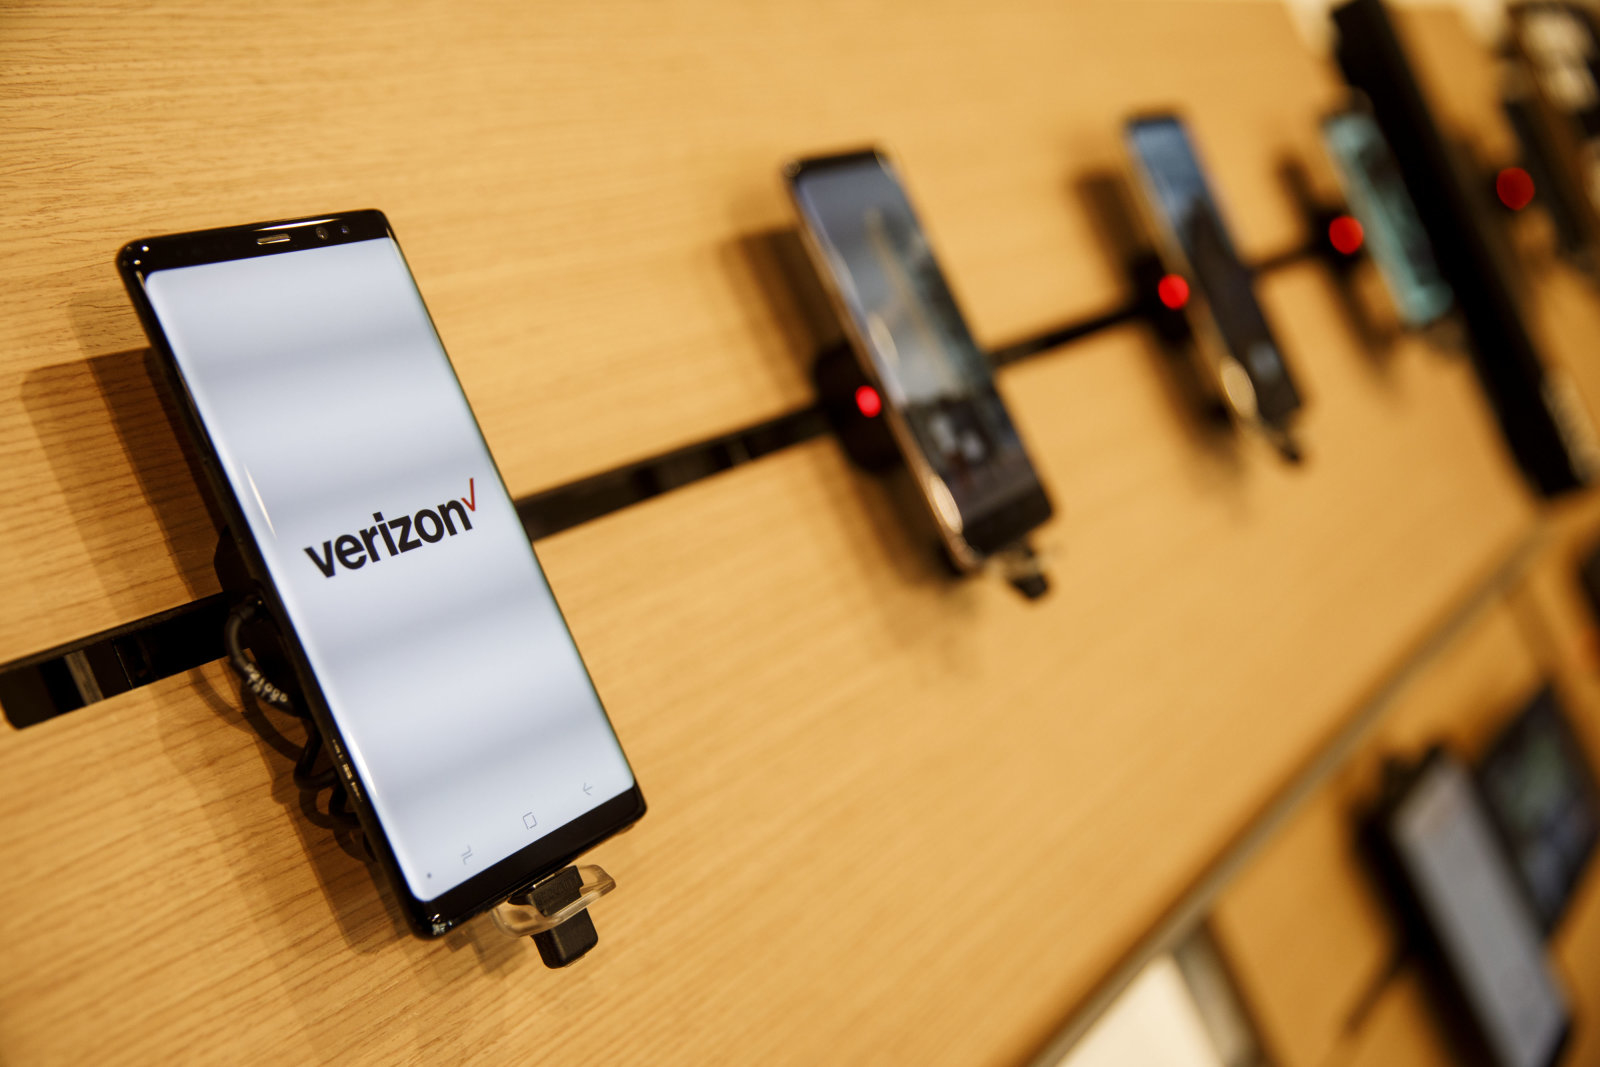 A Samsung Electronics Co. Galaxy Note 8 smartphone is displayed for sale at a Verizon Communications Inc. store in Brea, California, U.S., on Monday, Jan. 22, 2018. Verizon is scheduled to release earnings figures on January 23. Photographer: Patrick T. Fallon/Bloomberg via Getty Images